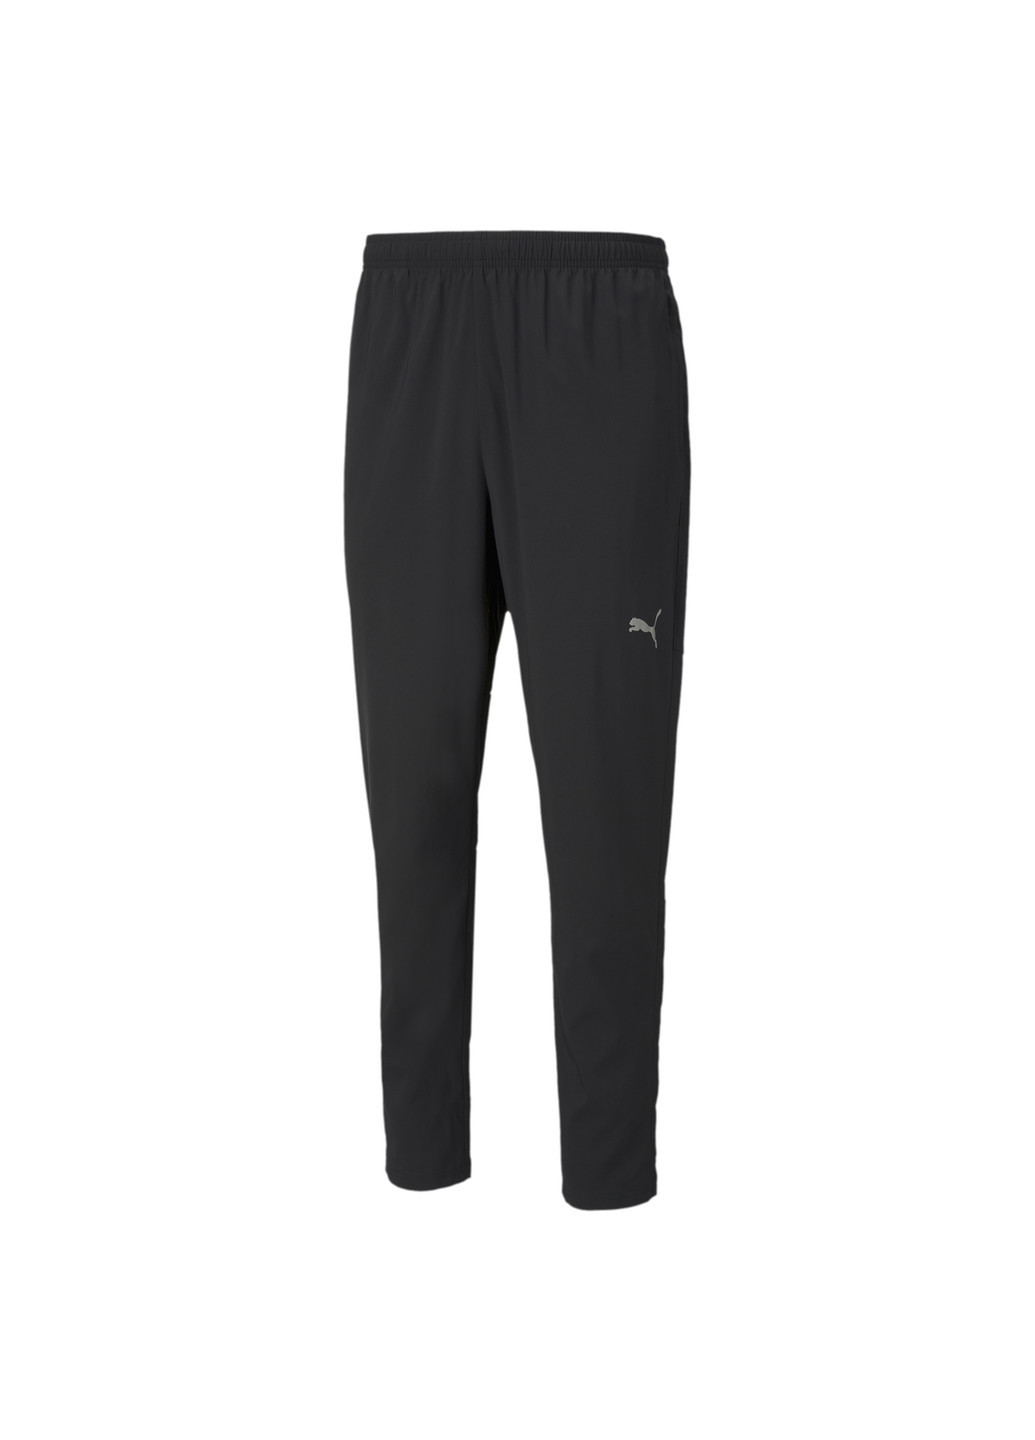 Штани Favourite Tapered Men's Running Pants Puma (216134302)